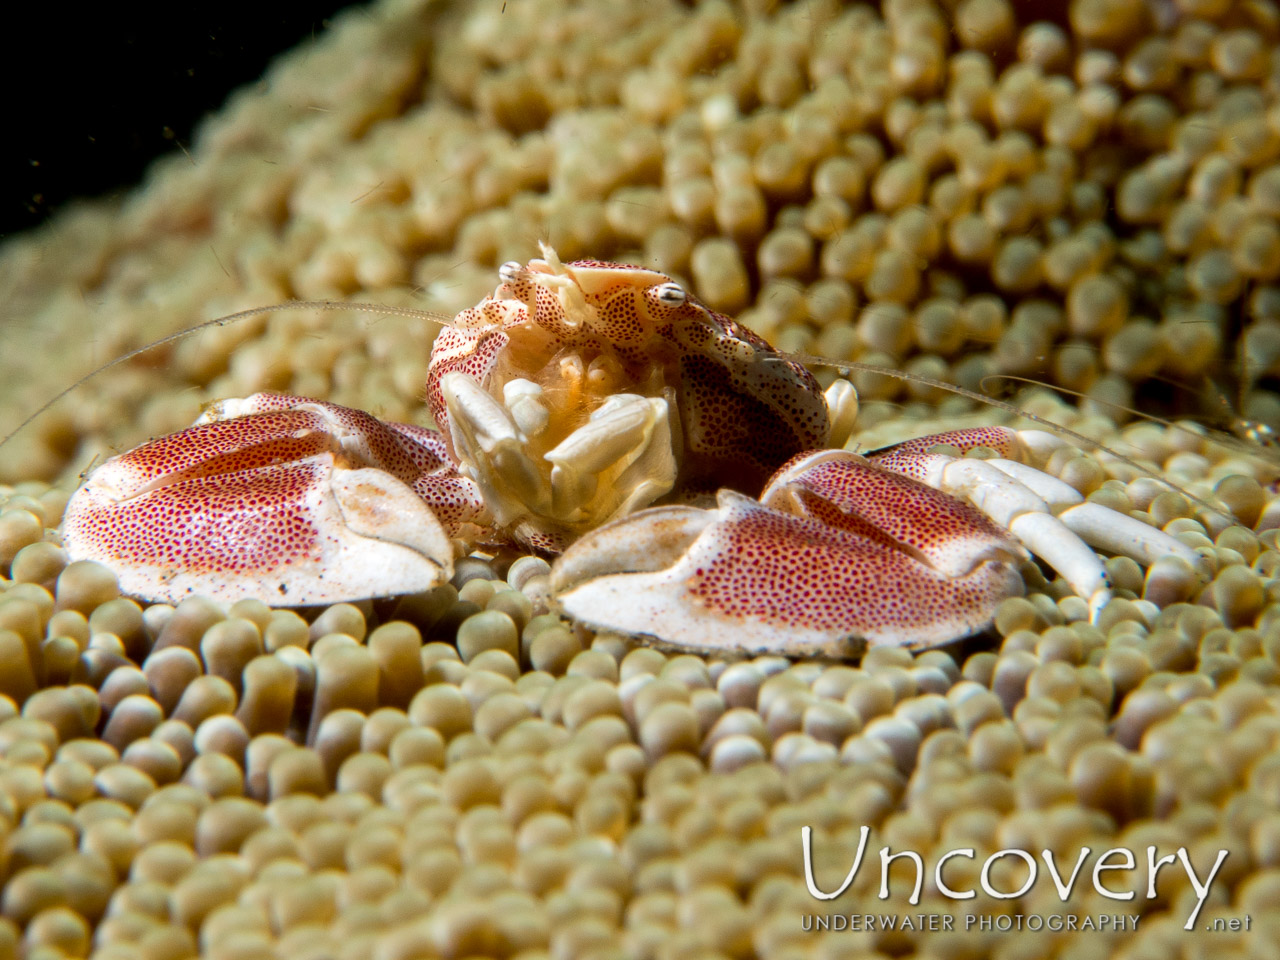 Spotted Porcelain Crab (neopetrolisthes Maculatus), photo taken in Indonesia, North Sulawesi, Lembeh Strait, Jahir 1